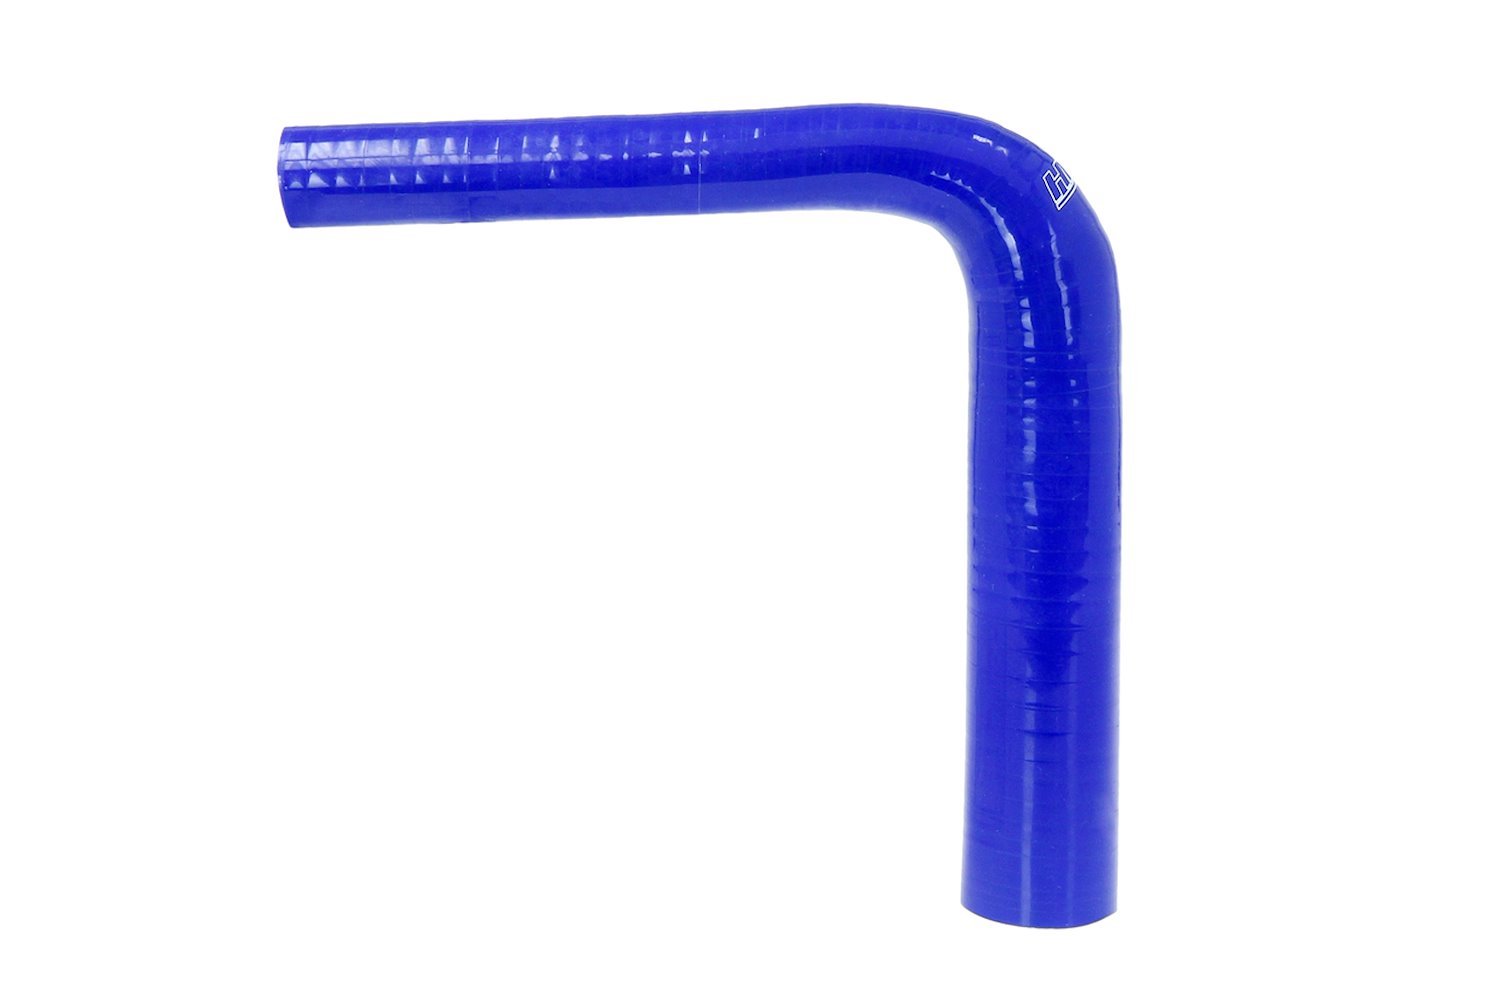 HTSER90-075-150-BLUE Silicone 90-Degree Elbow Hose, High-Temp 4-Ply Reinforced, 3/4 in. - 1-1/2 in. ID, Blue